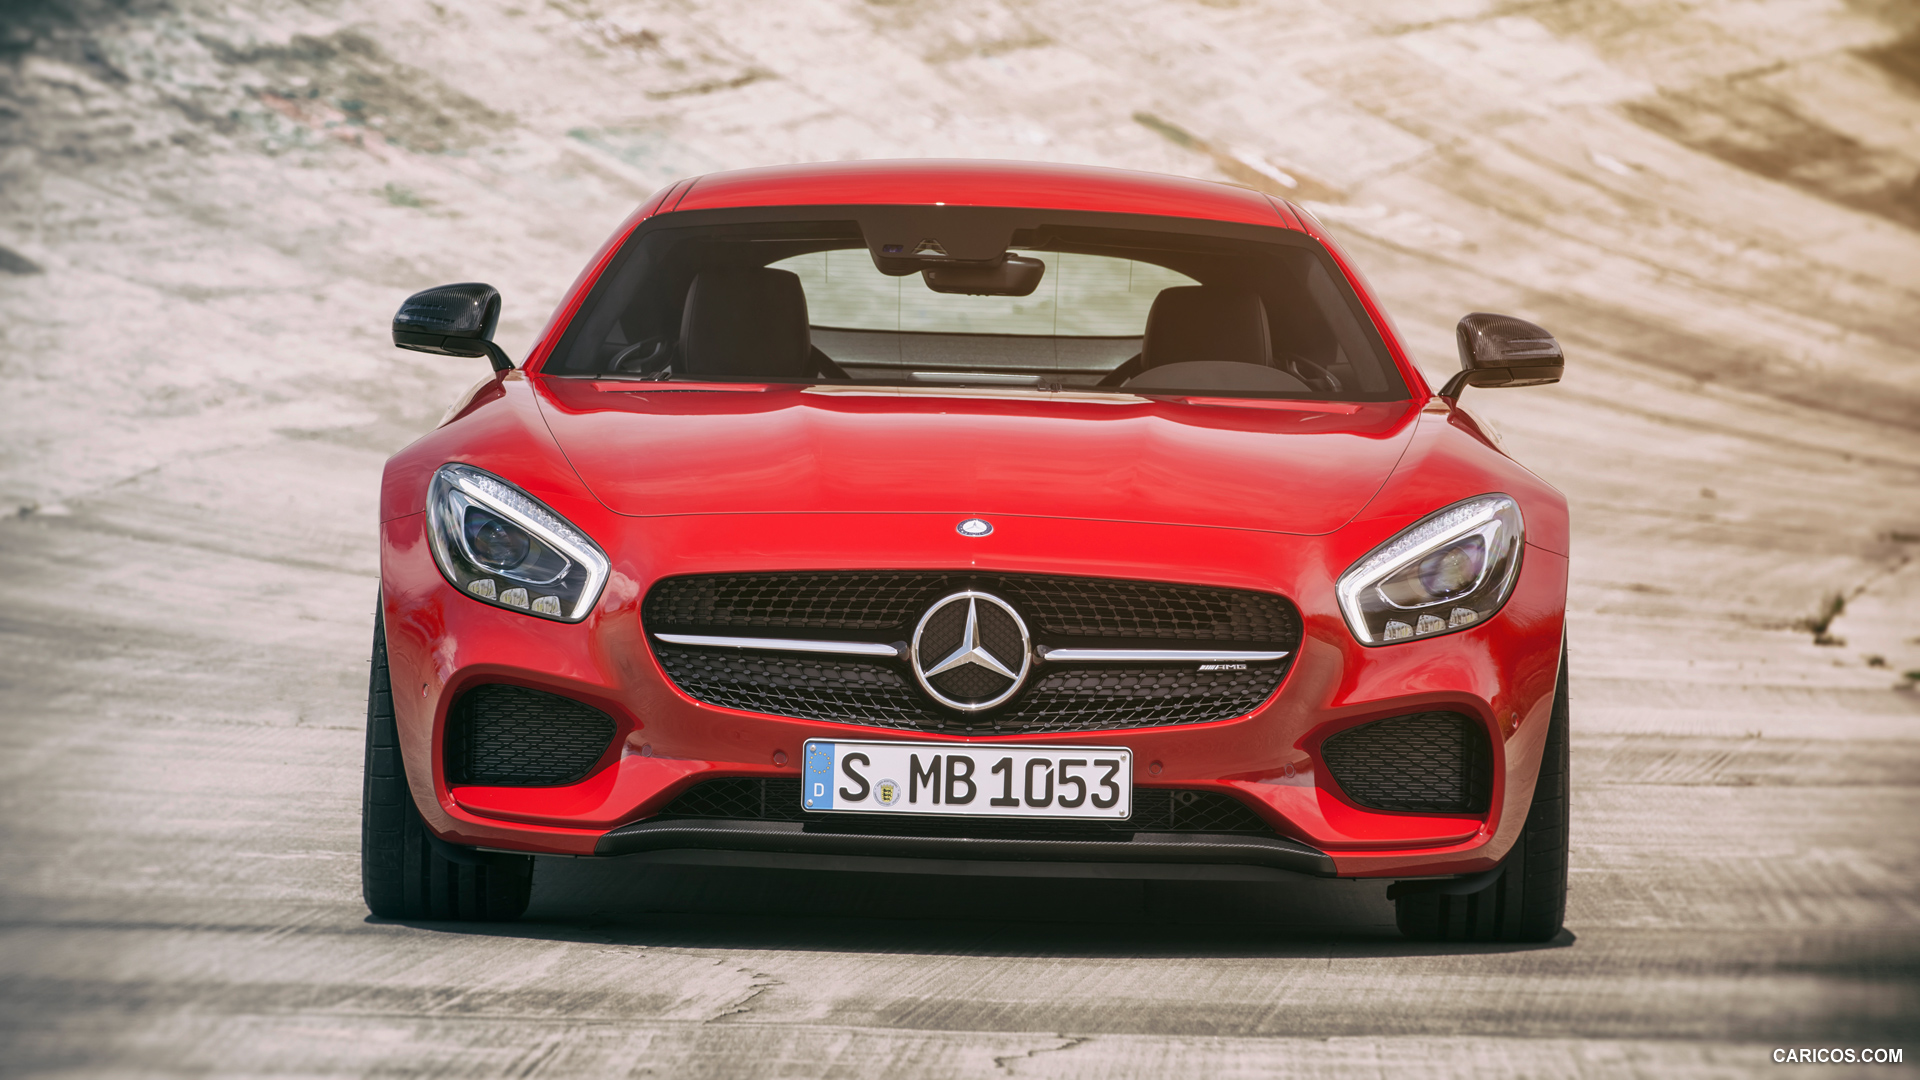 2016 Mercedes-AMG GT (Fire Opal) - Front, #2 of 190